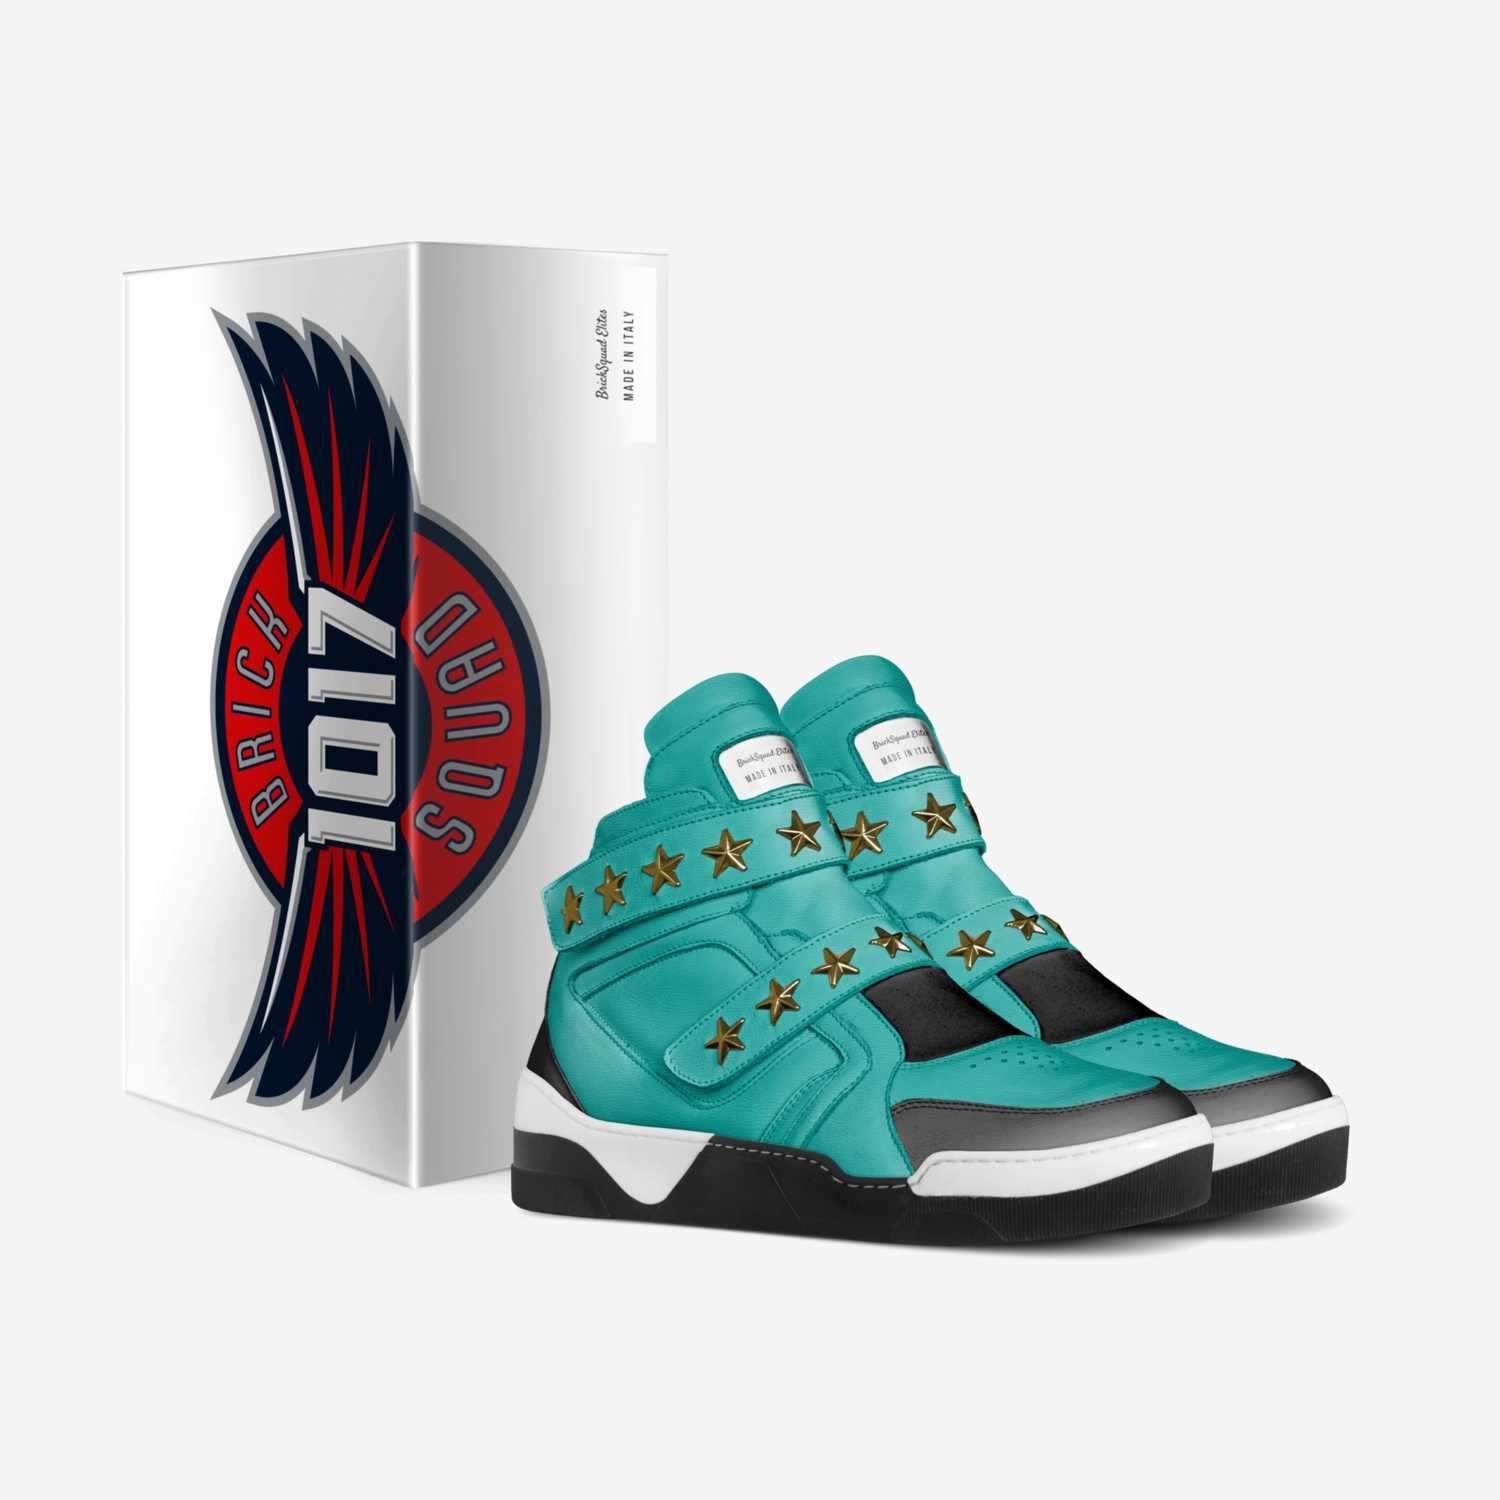 BrickSquad Elites custom made in Italy shoes by Omar Ali | Box view